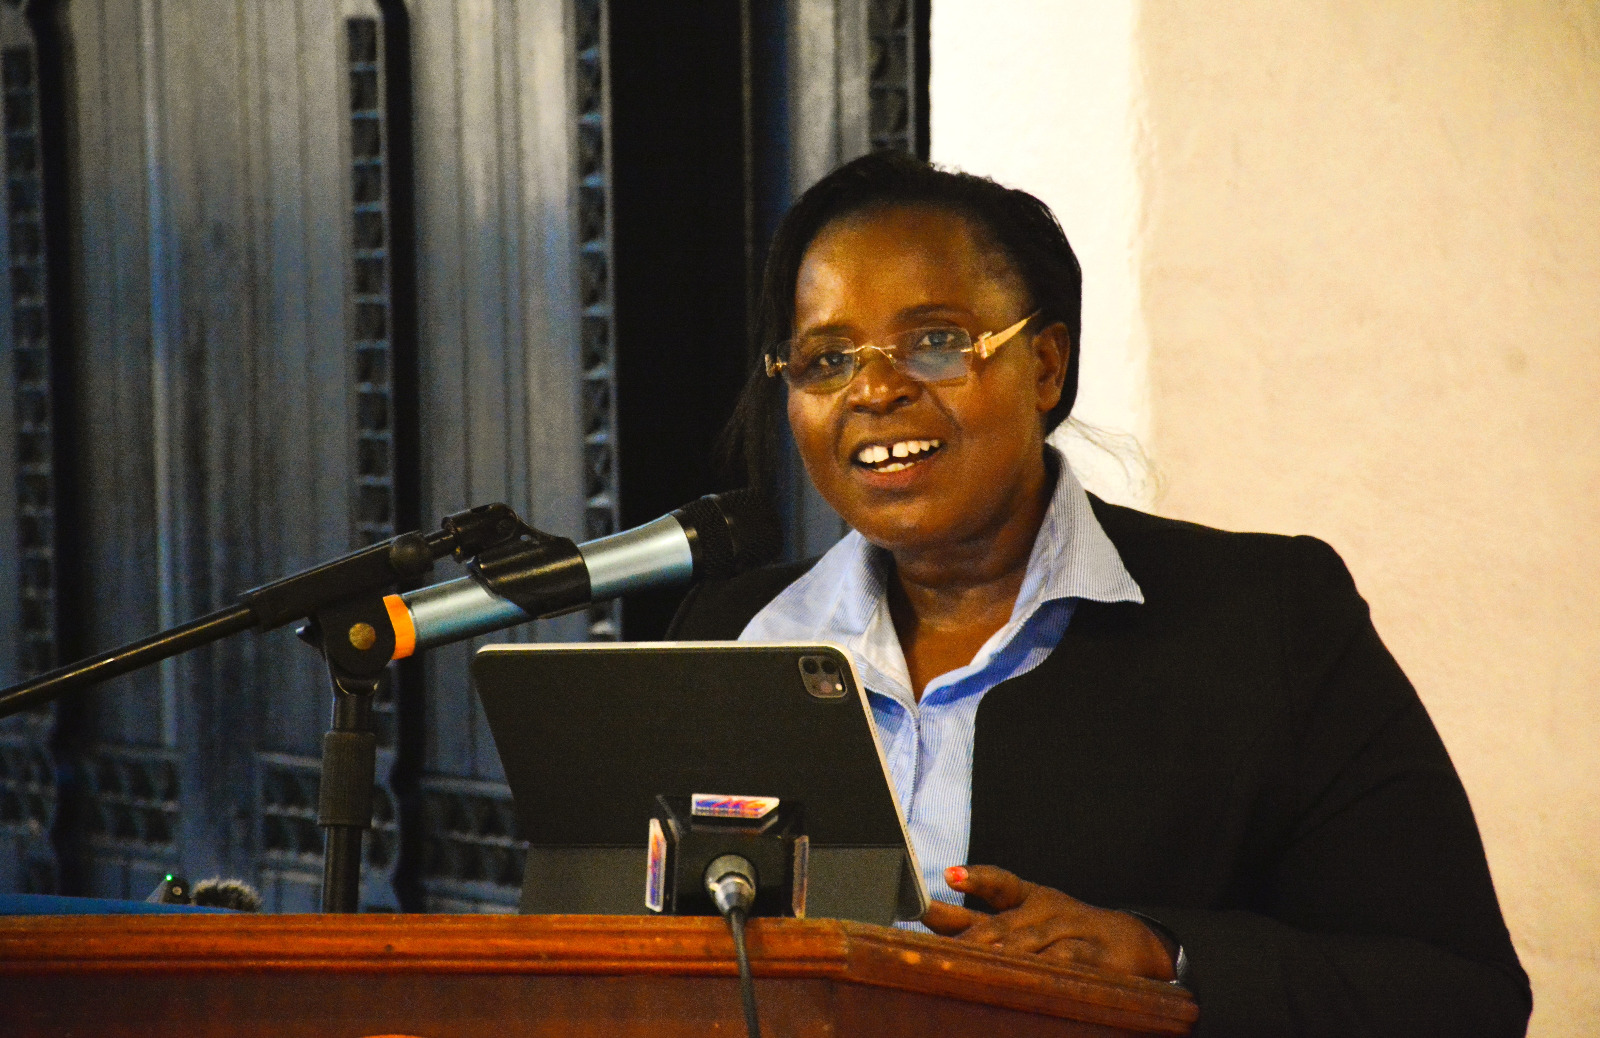 The Cabinet Secretary, Hon. Peninah Malonza, giving her speech during the Lusaka Agreement Cooperative Enforcement Operations Directed at Illegal Trade in Wild Fauna and Flora Workshop.